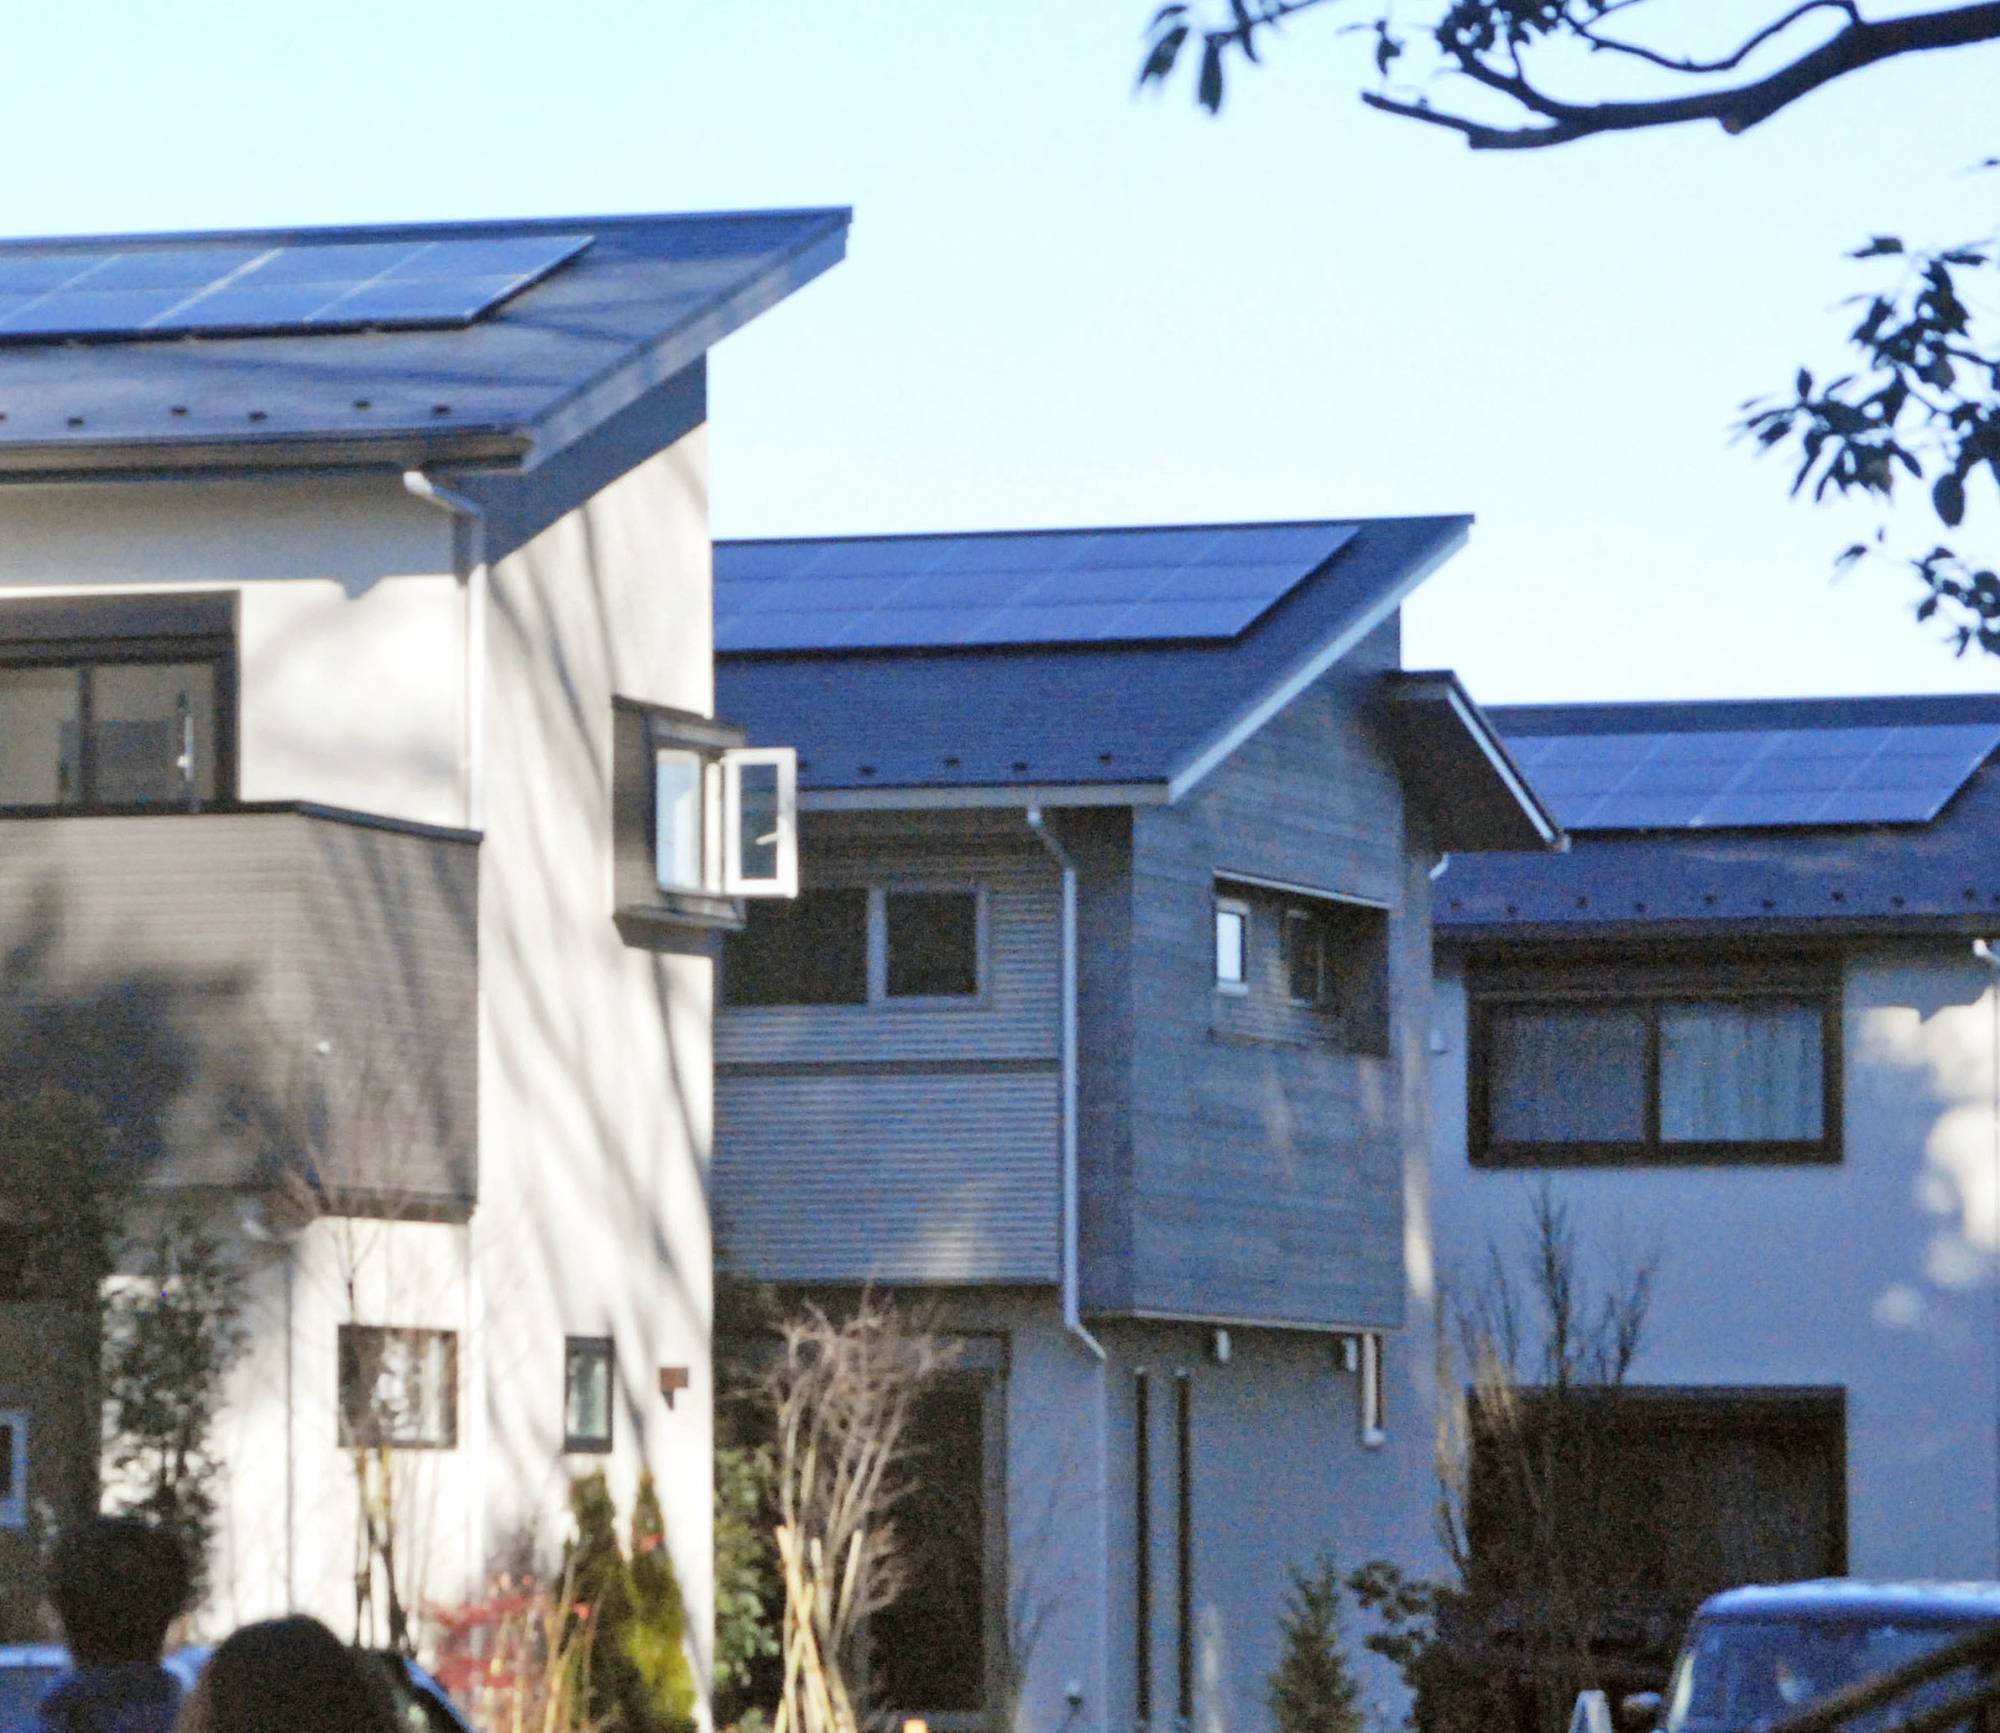 Tokyo will introduce a system from fiscal 2025 requiring newly built homes to have solar panels, the first such mandate in Japan. | KYODO